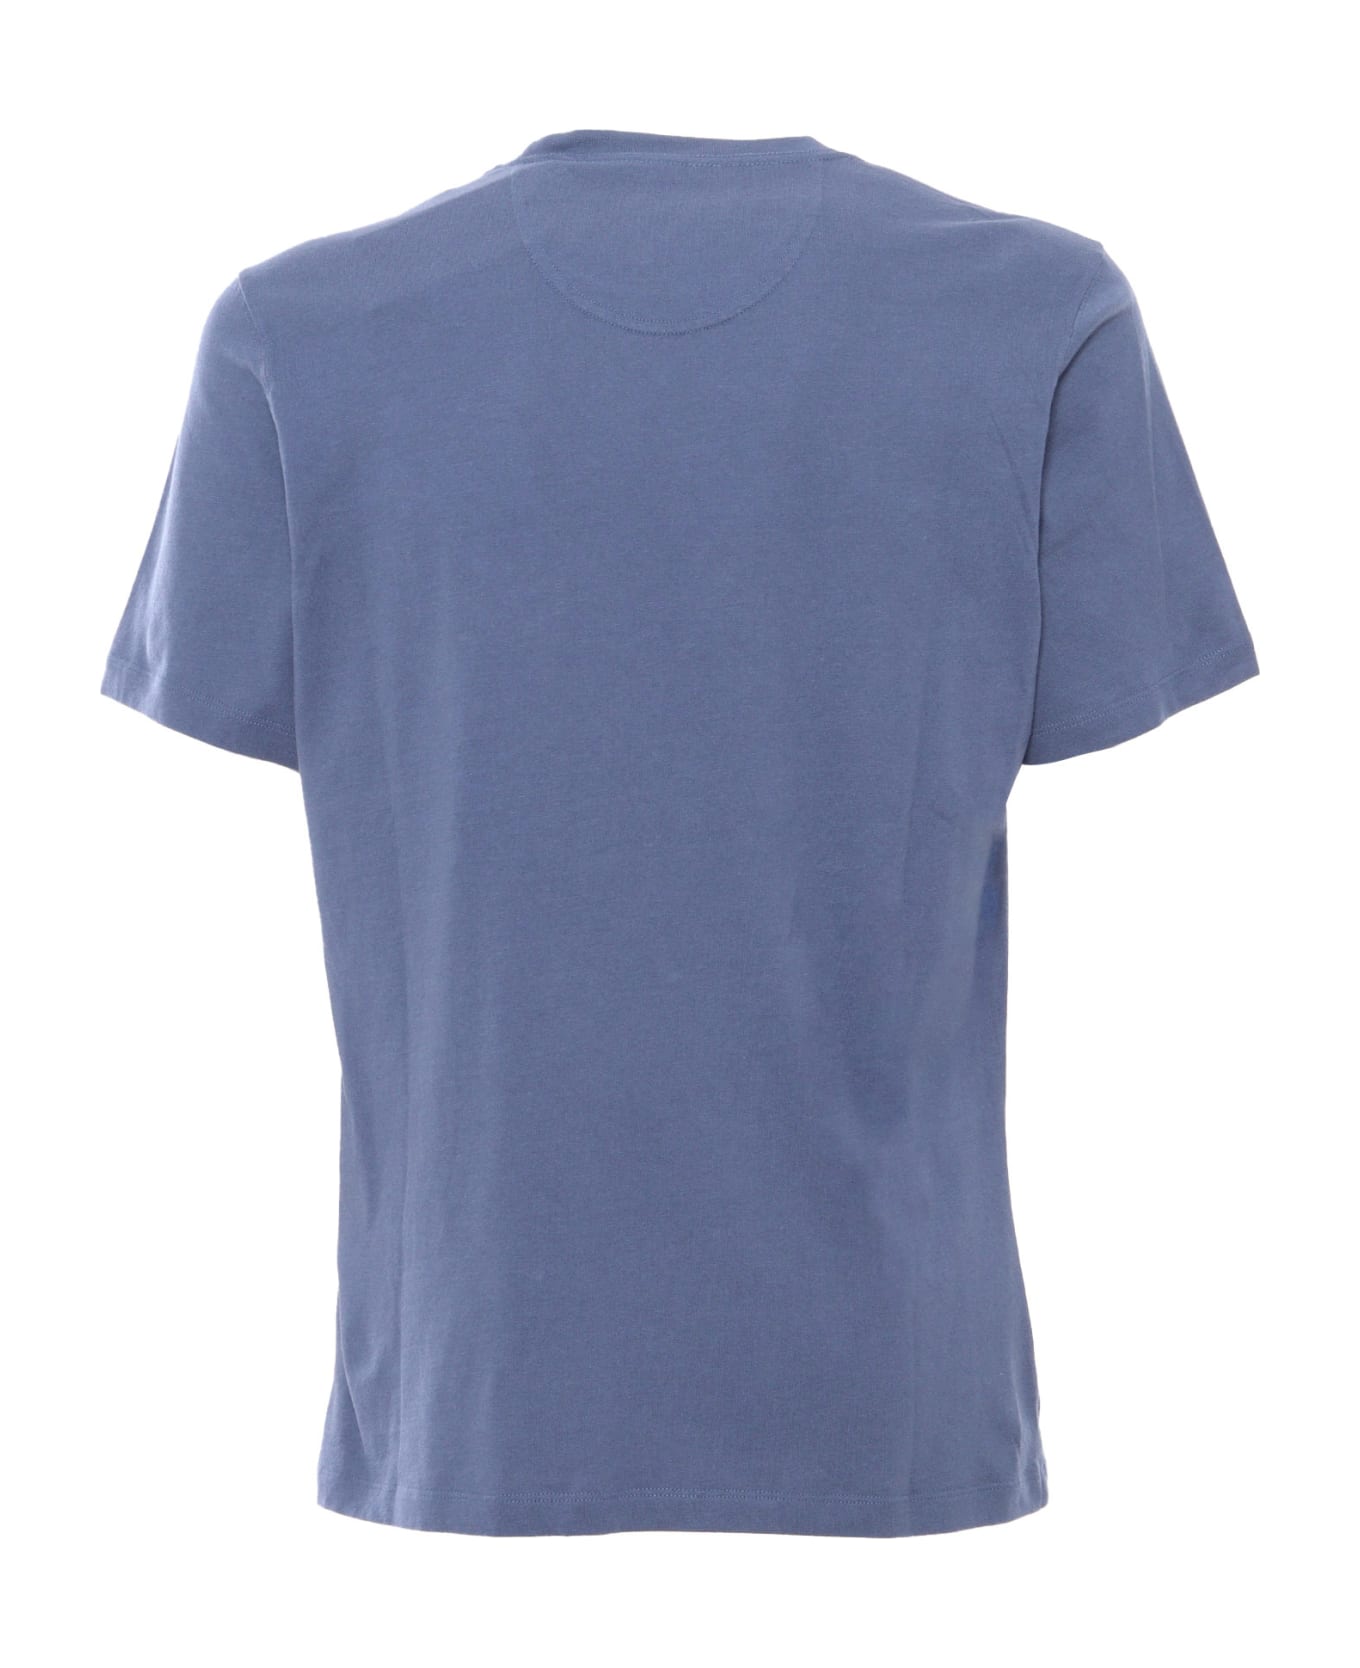 Barbour Blue Printed T-shirt - BLUE シャツ